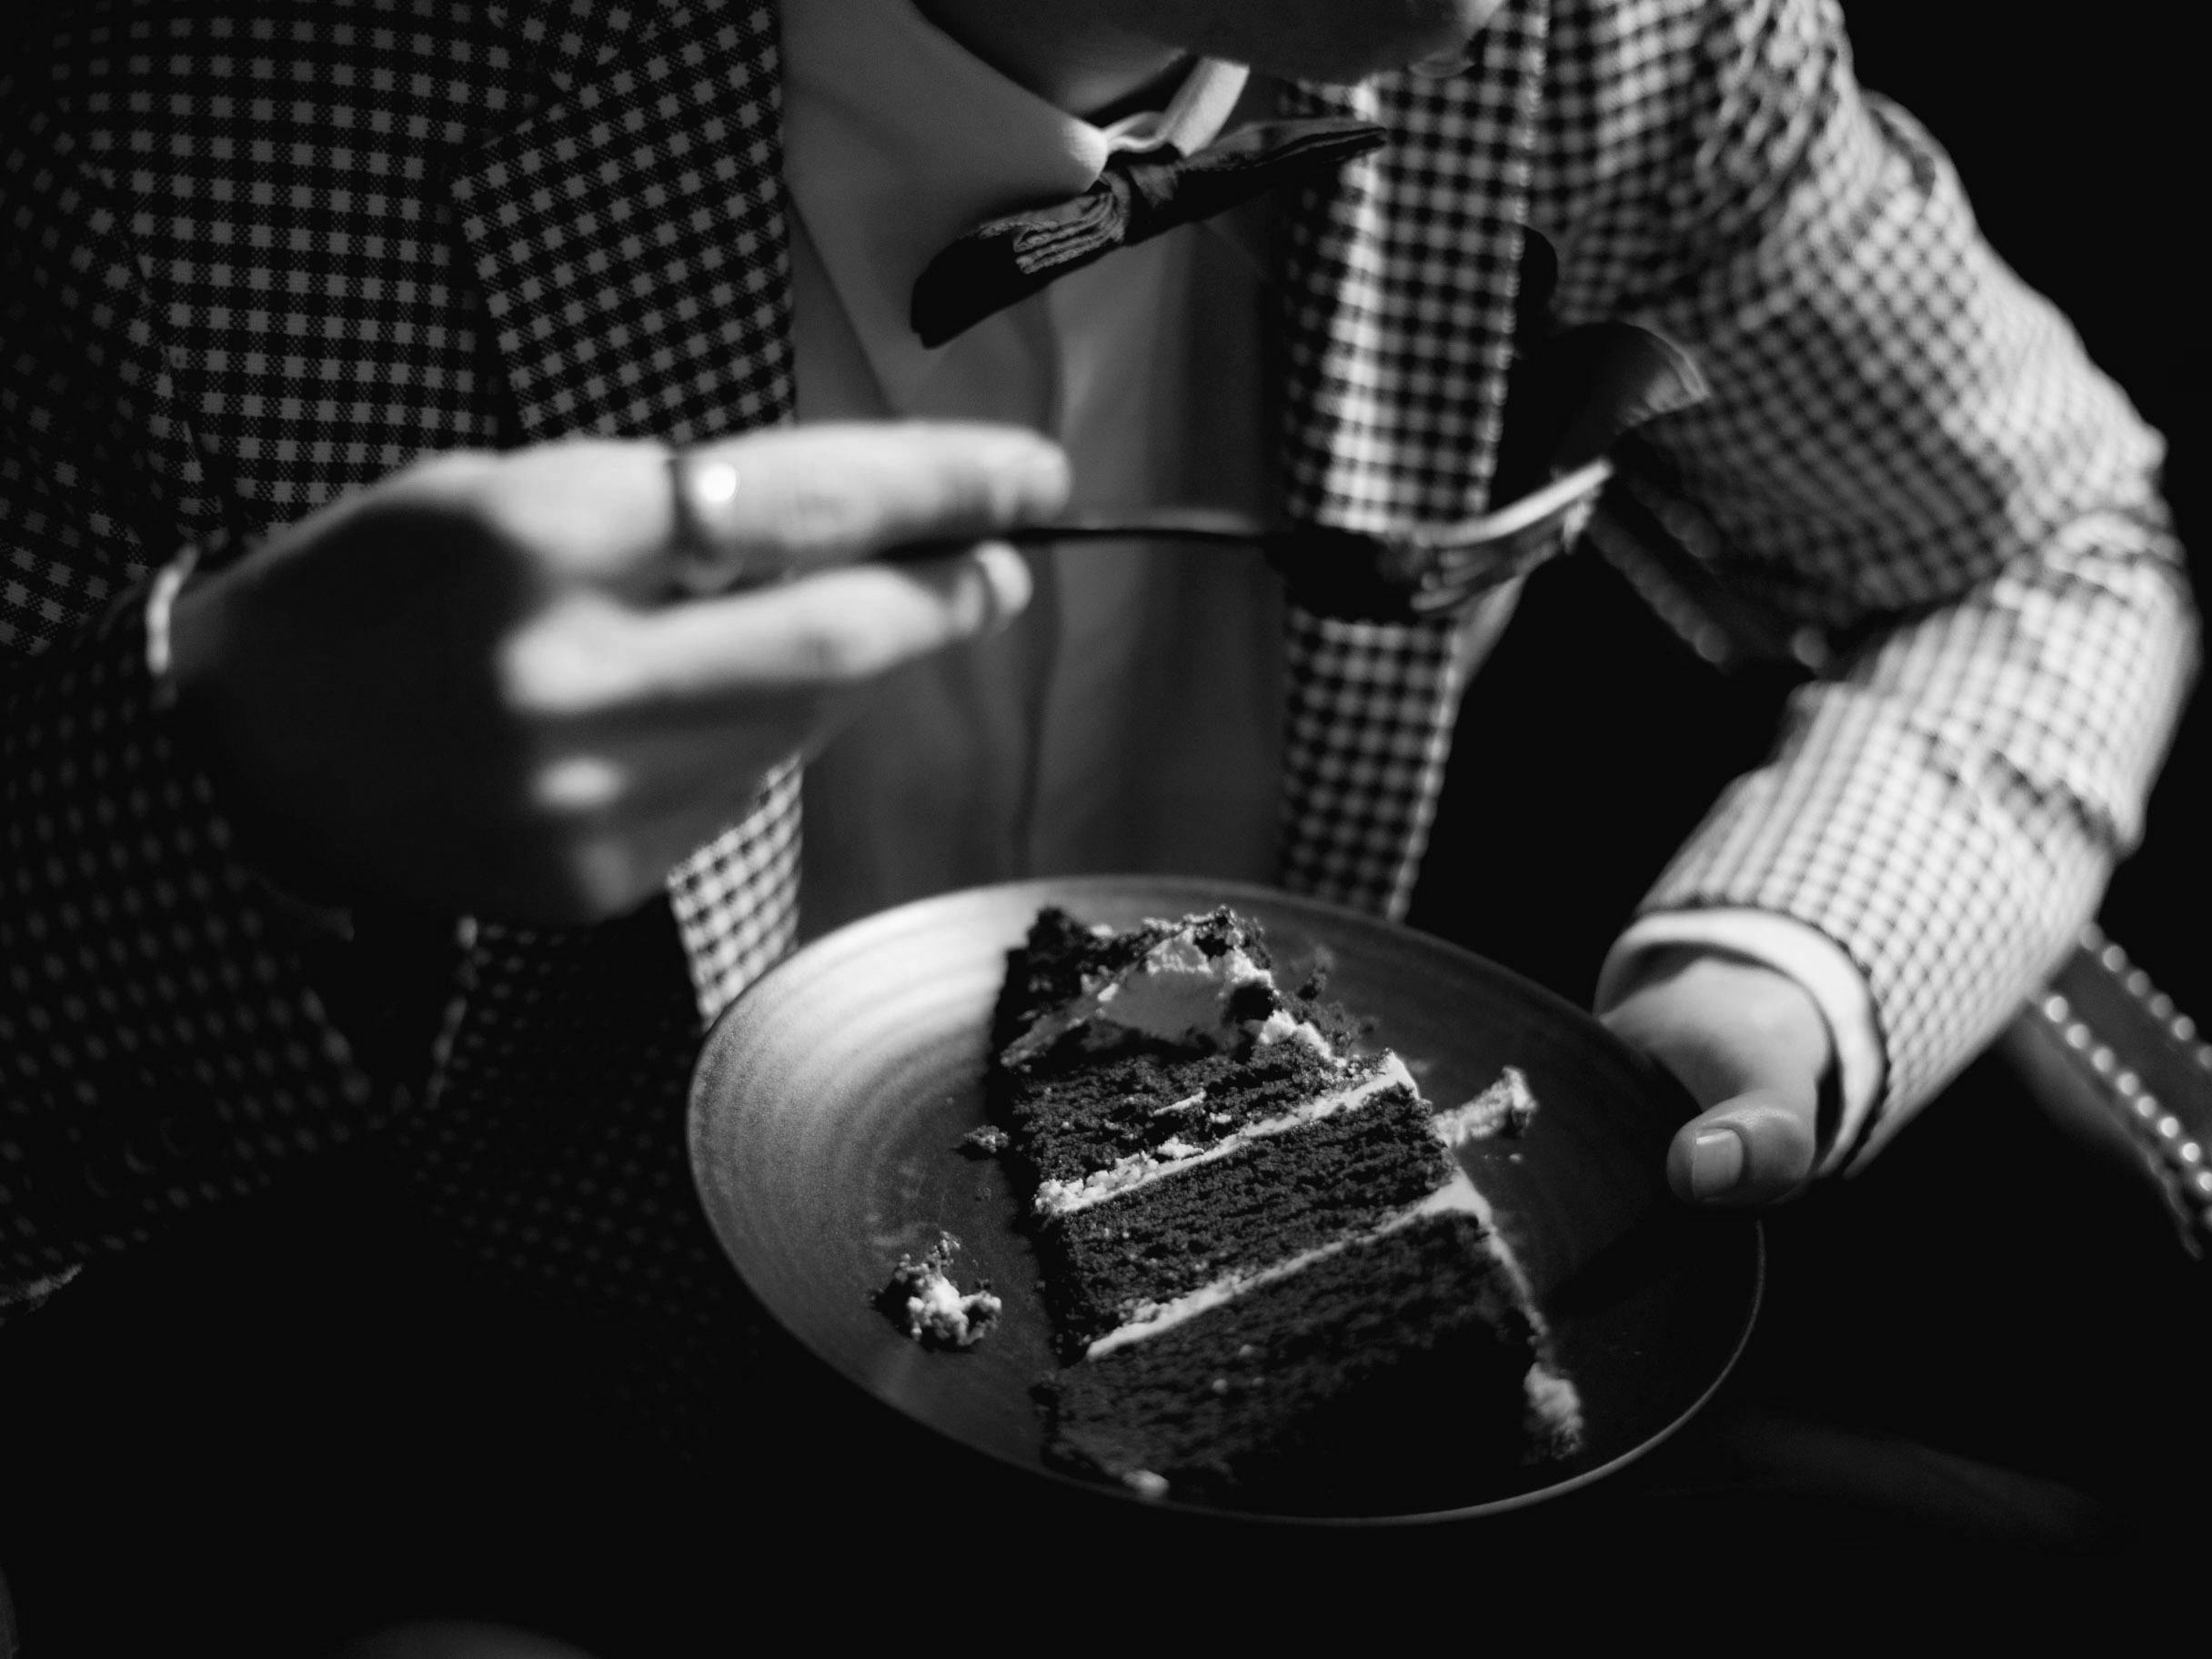 A guest tucking into a piece of wedding cake | Source: Pexels